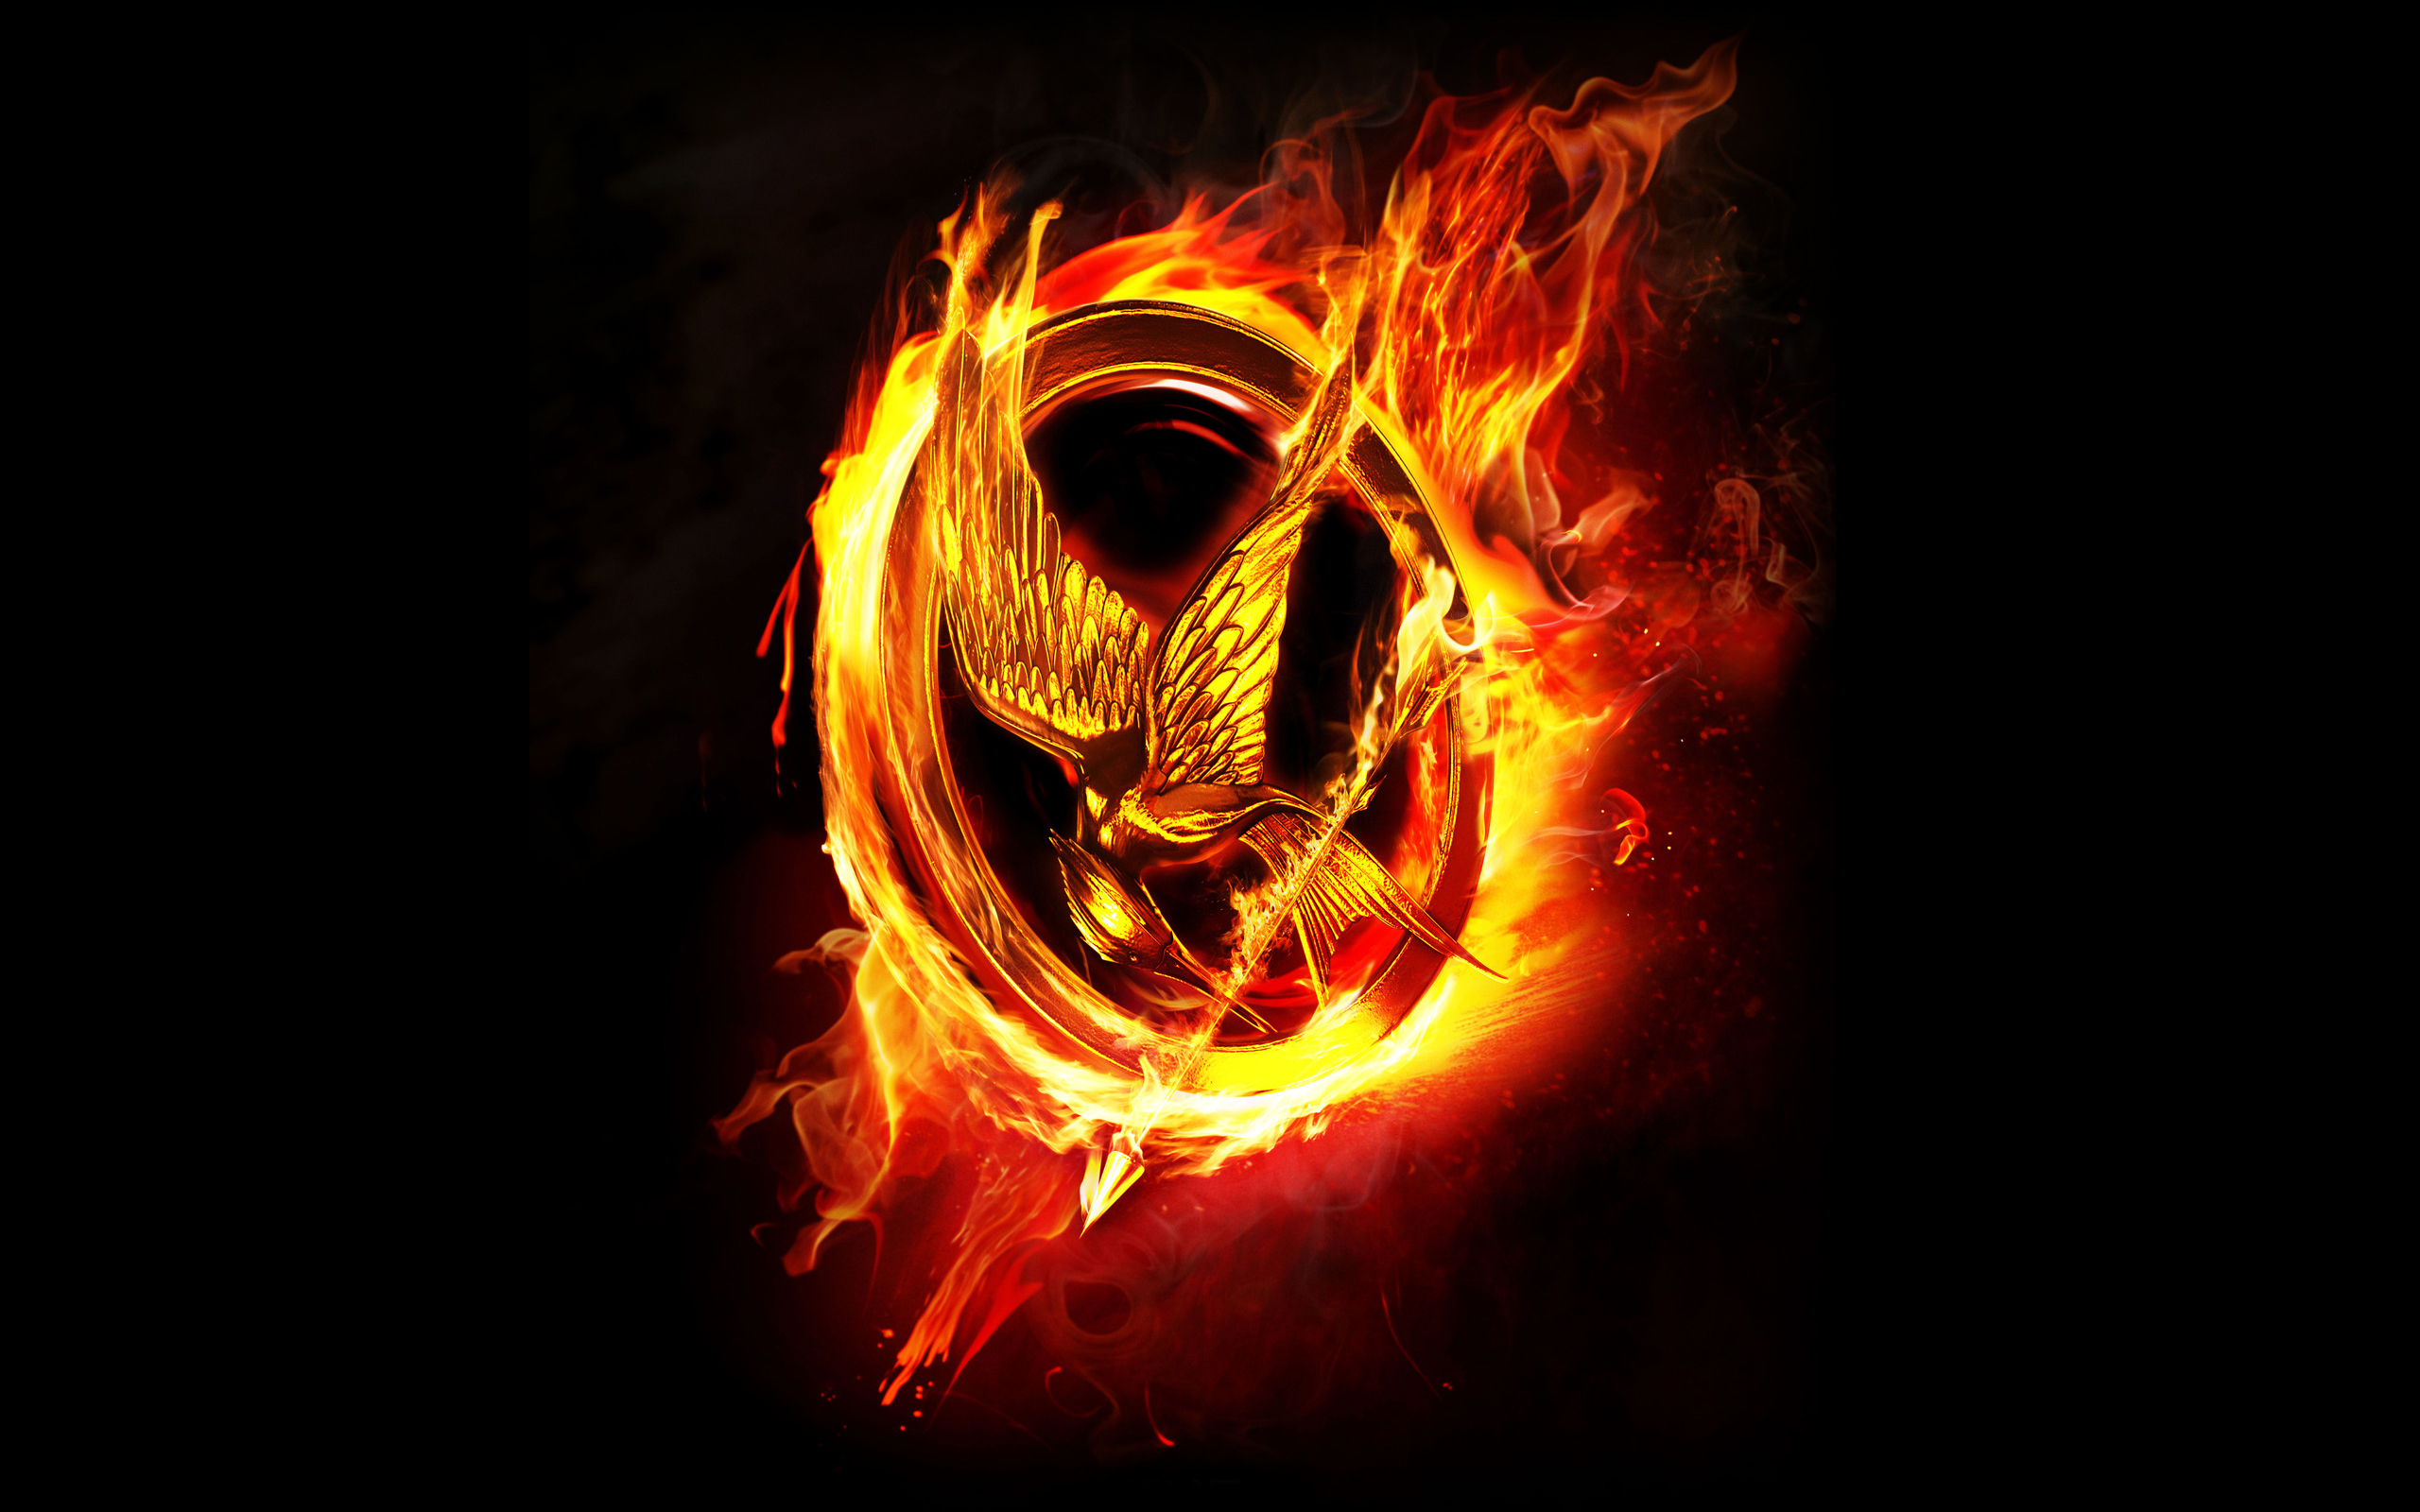 Wu/4436 22 April Hunger Games Hd Wallpapers - Hunger Games Backgrounds - HD Wallpaper 